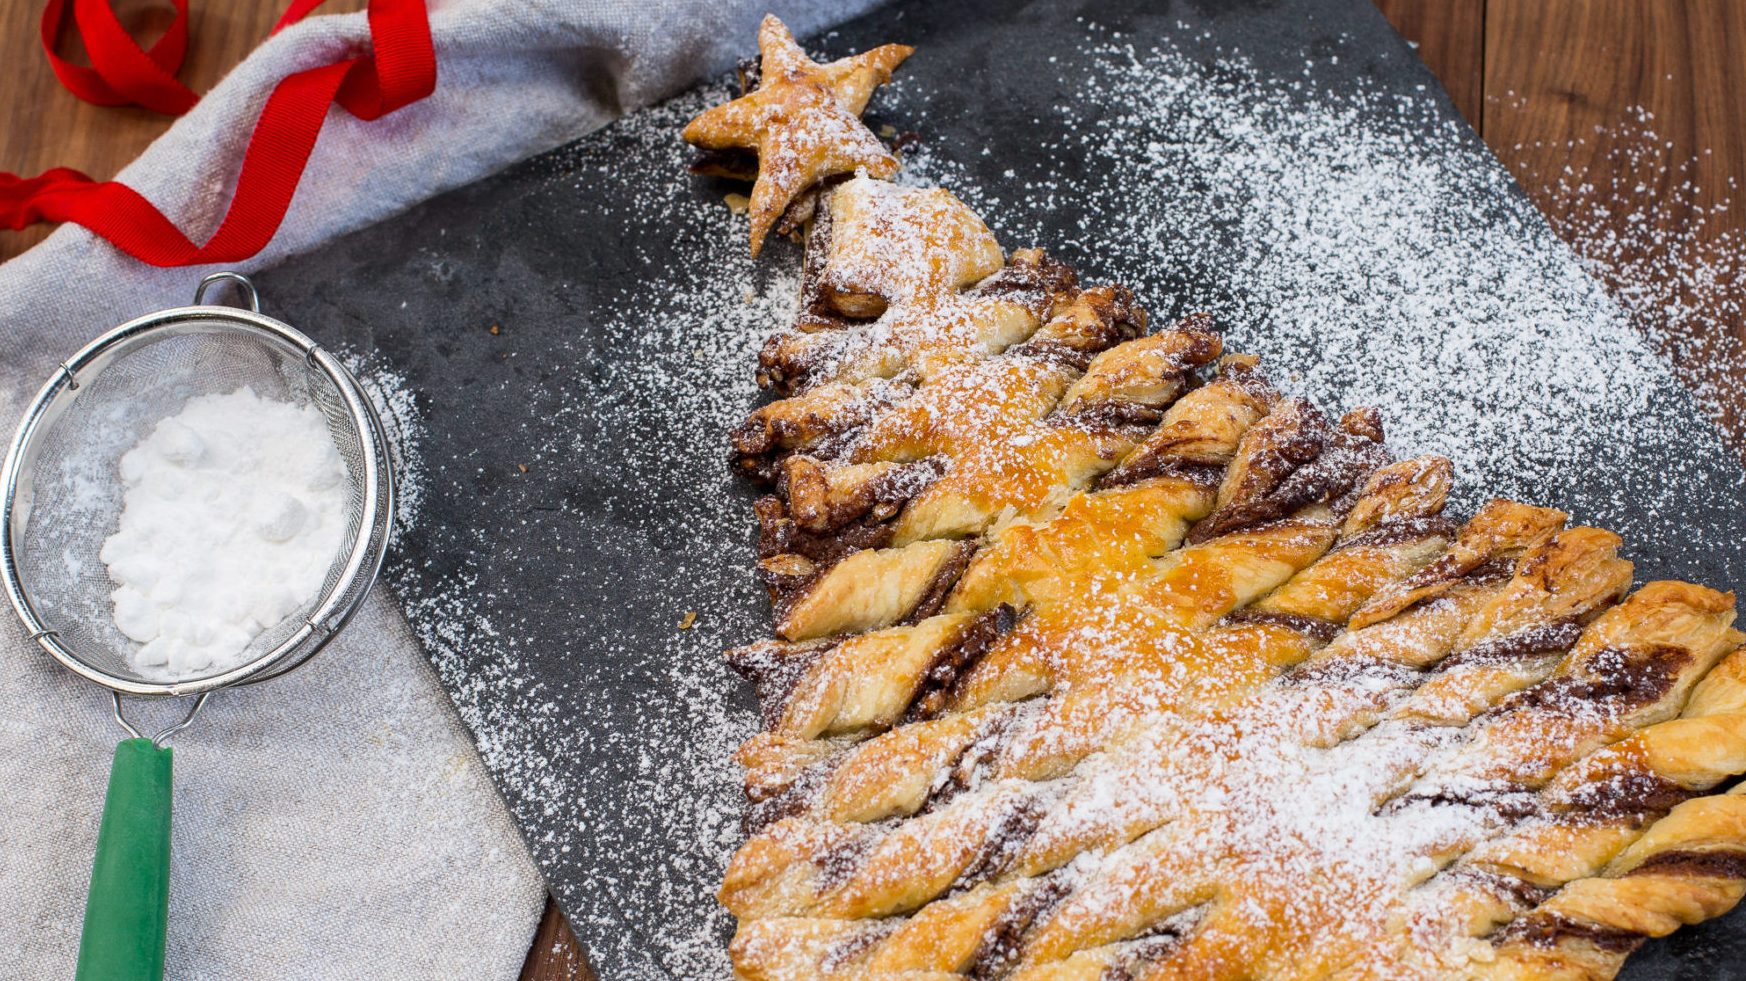 Christmas tree made of pastry willed with chocolate hazelnut spread